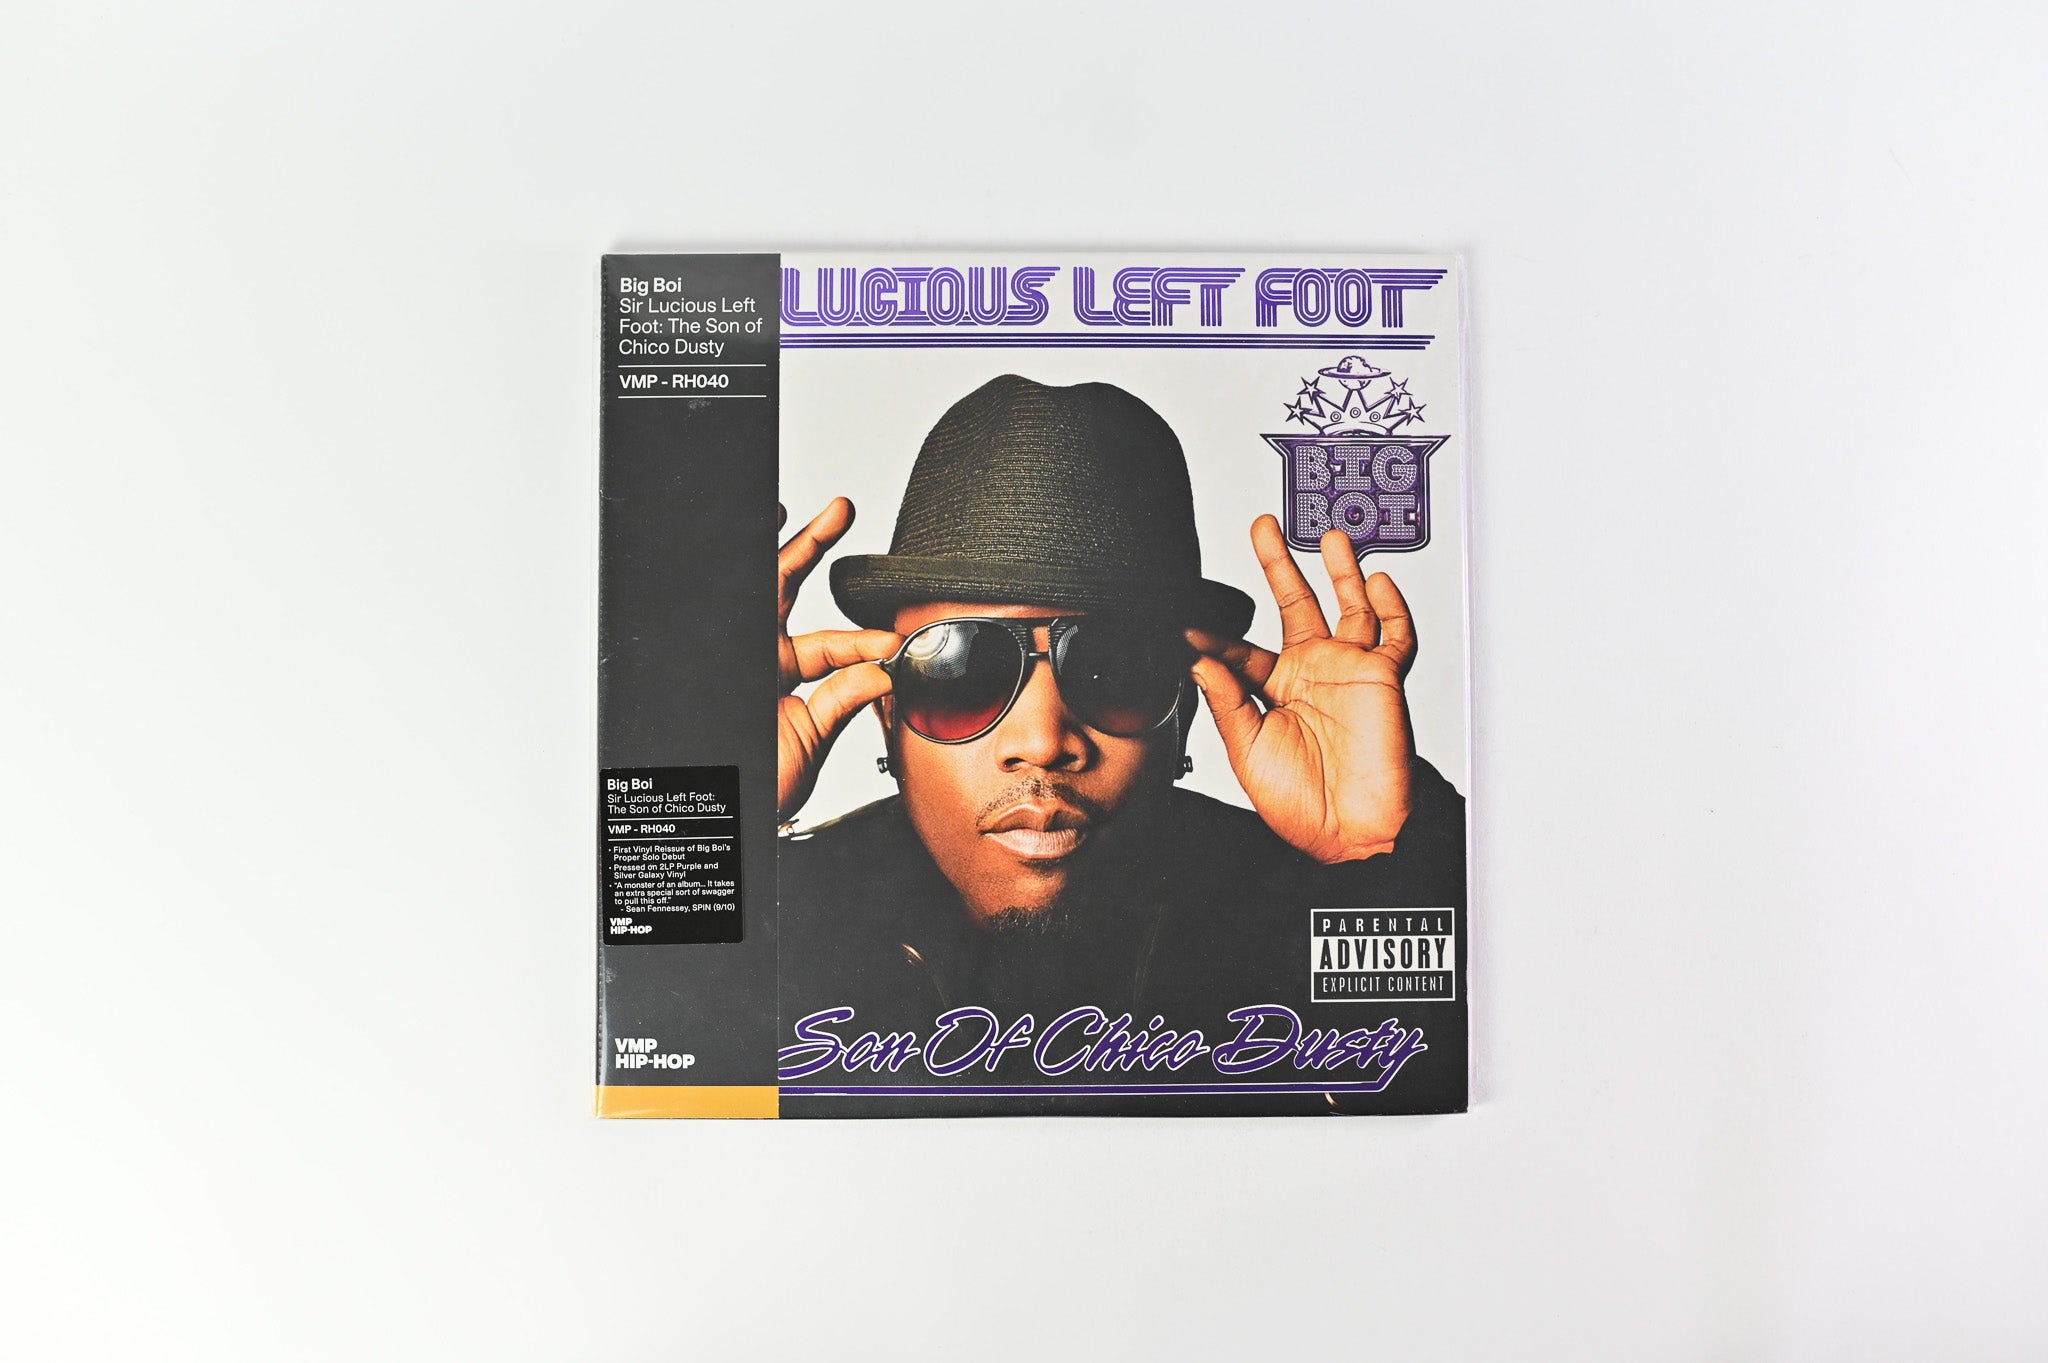 Big Boi - Sir Lucious Left Foot... The Son Of Chico Dusty Reissue on Def Jam Recordings Vinyl Me, Please Purple/Silver Swirl Vinyl